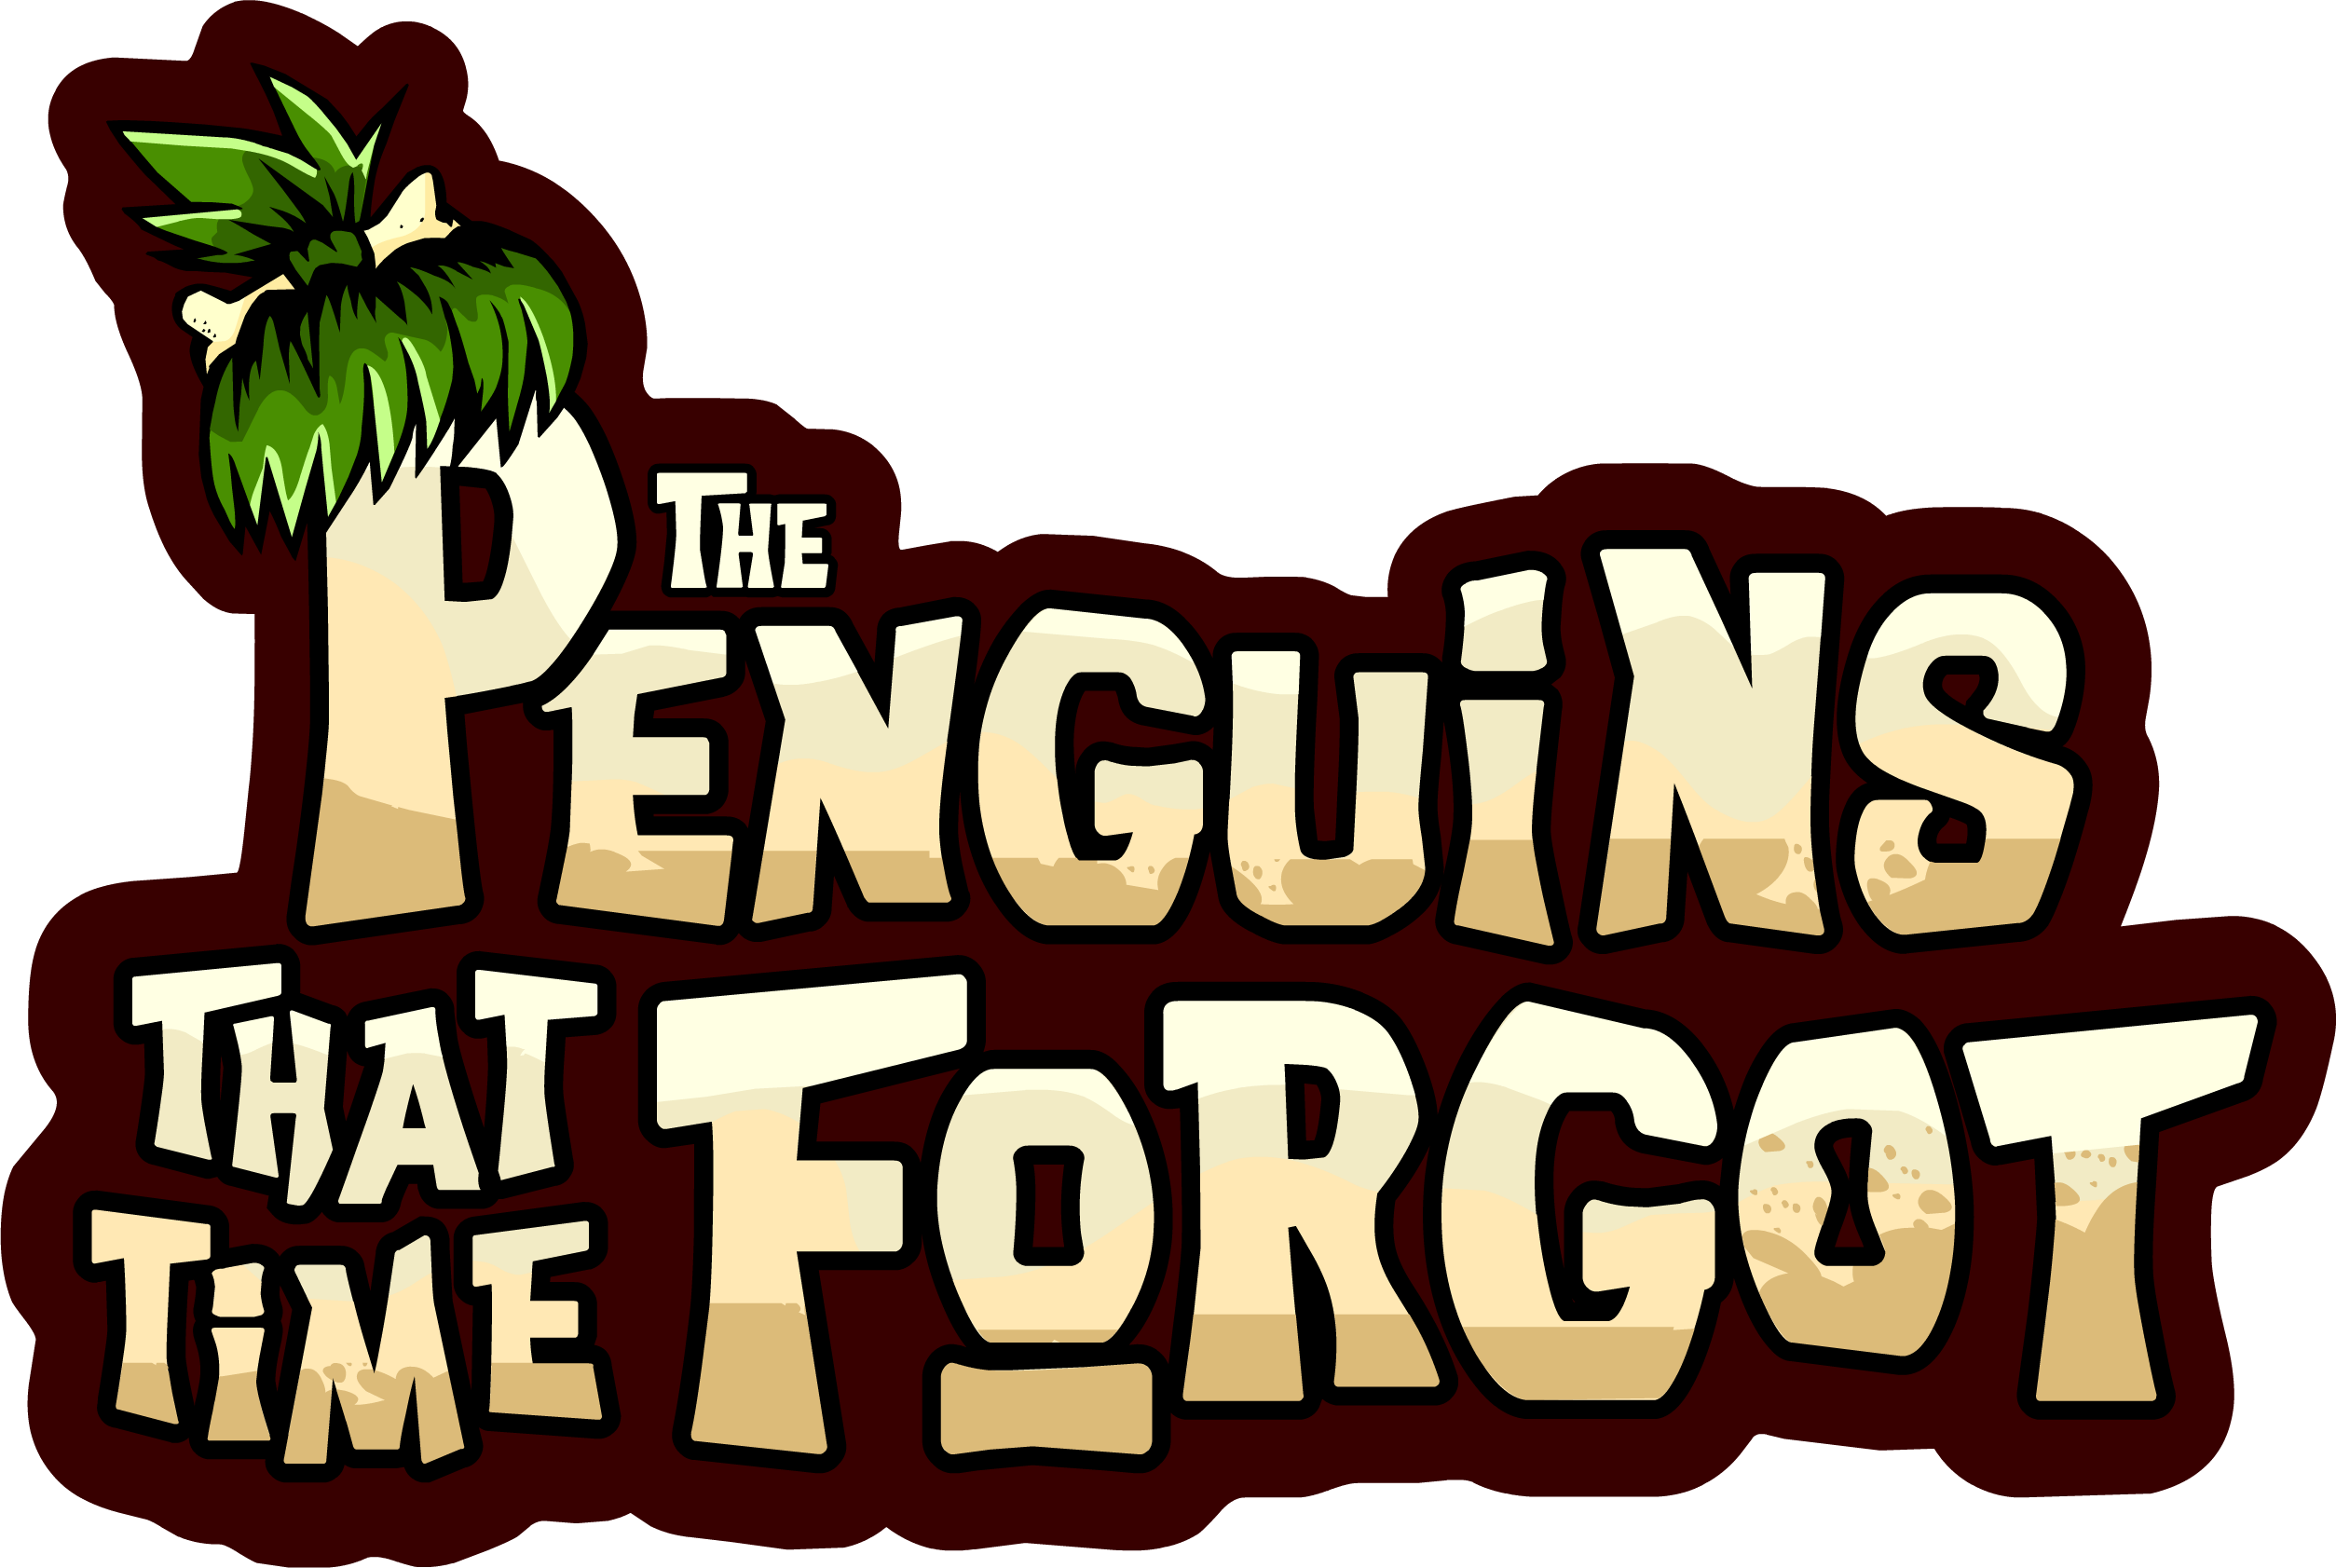 A rebooted Club Penguin is giving millennials their first dose of digital  nostalgia